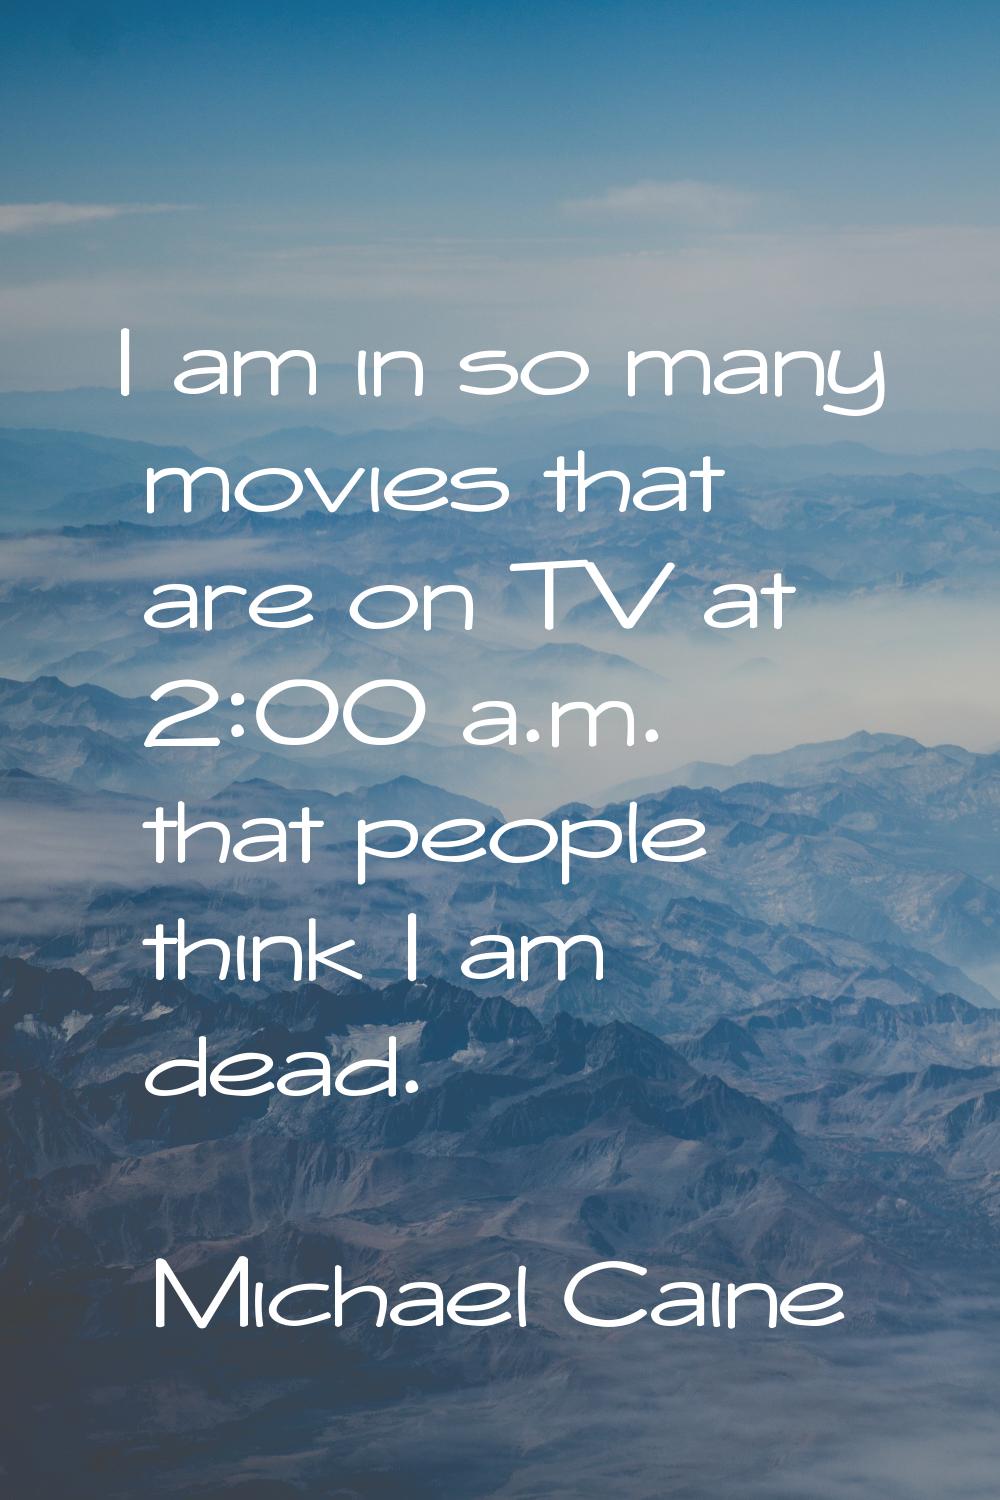 I am in so many movies that are on TV at 2:00 a.m. that people think I am dead.